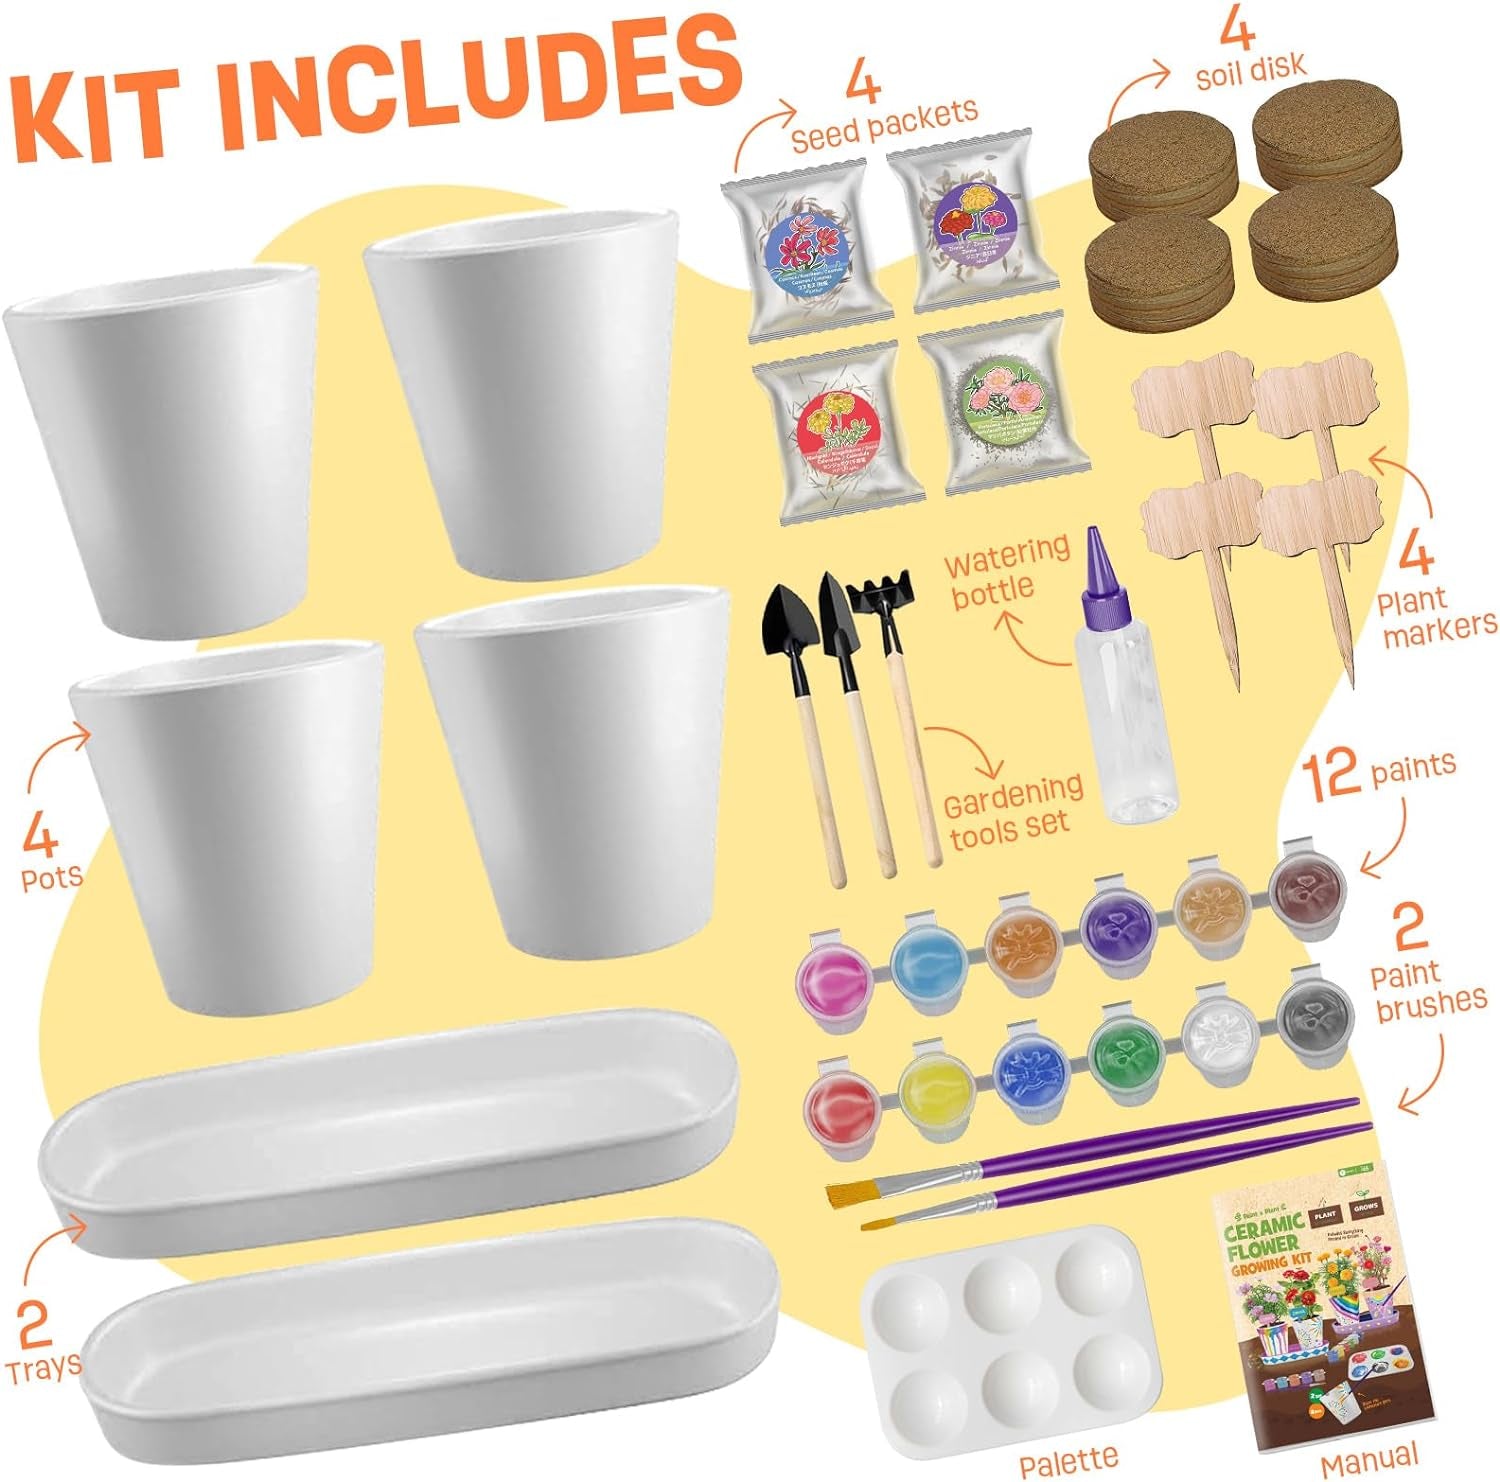 4 Set Paint & Plant Flower Gardening Kit - Gifts for Girls Ages 8-12, Arts and Crafts for Kids Ages 8-12, Kids Gardening Set, Craft Toys Birthday Gifts for Girls Boys Ages 4 5 6 7 8 9 10 11 12